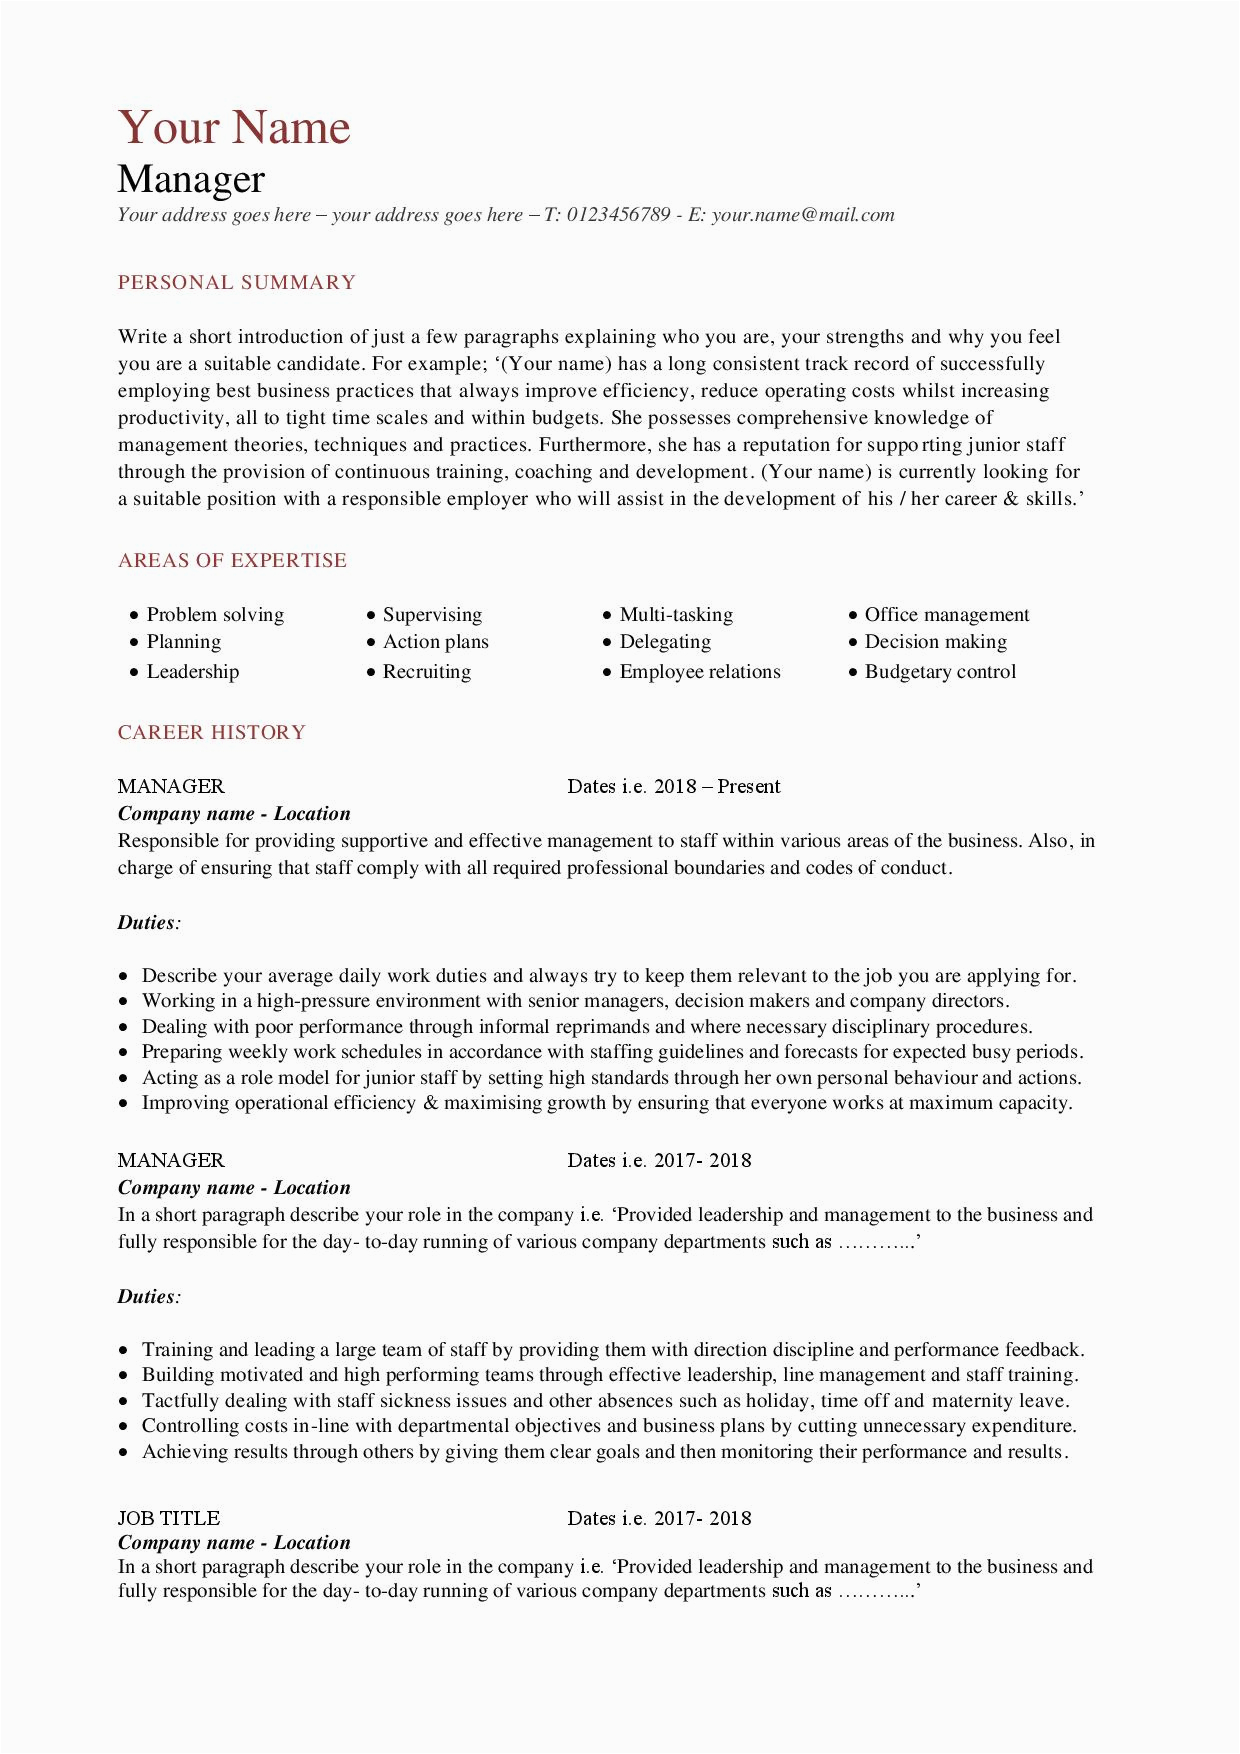 Resume Template for someone who Has Never Had A Job Resume Template for someone who Has Never Worked